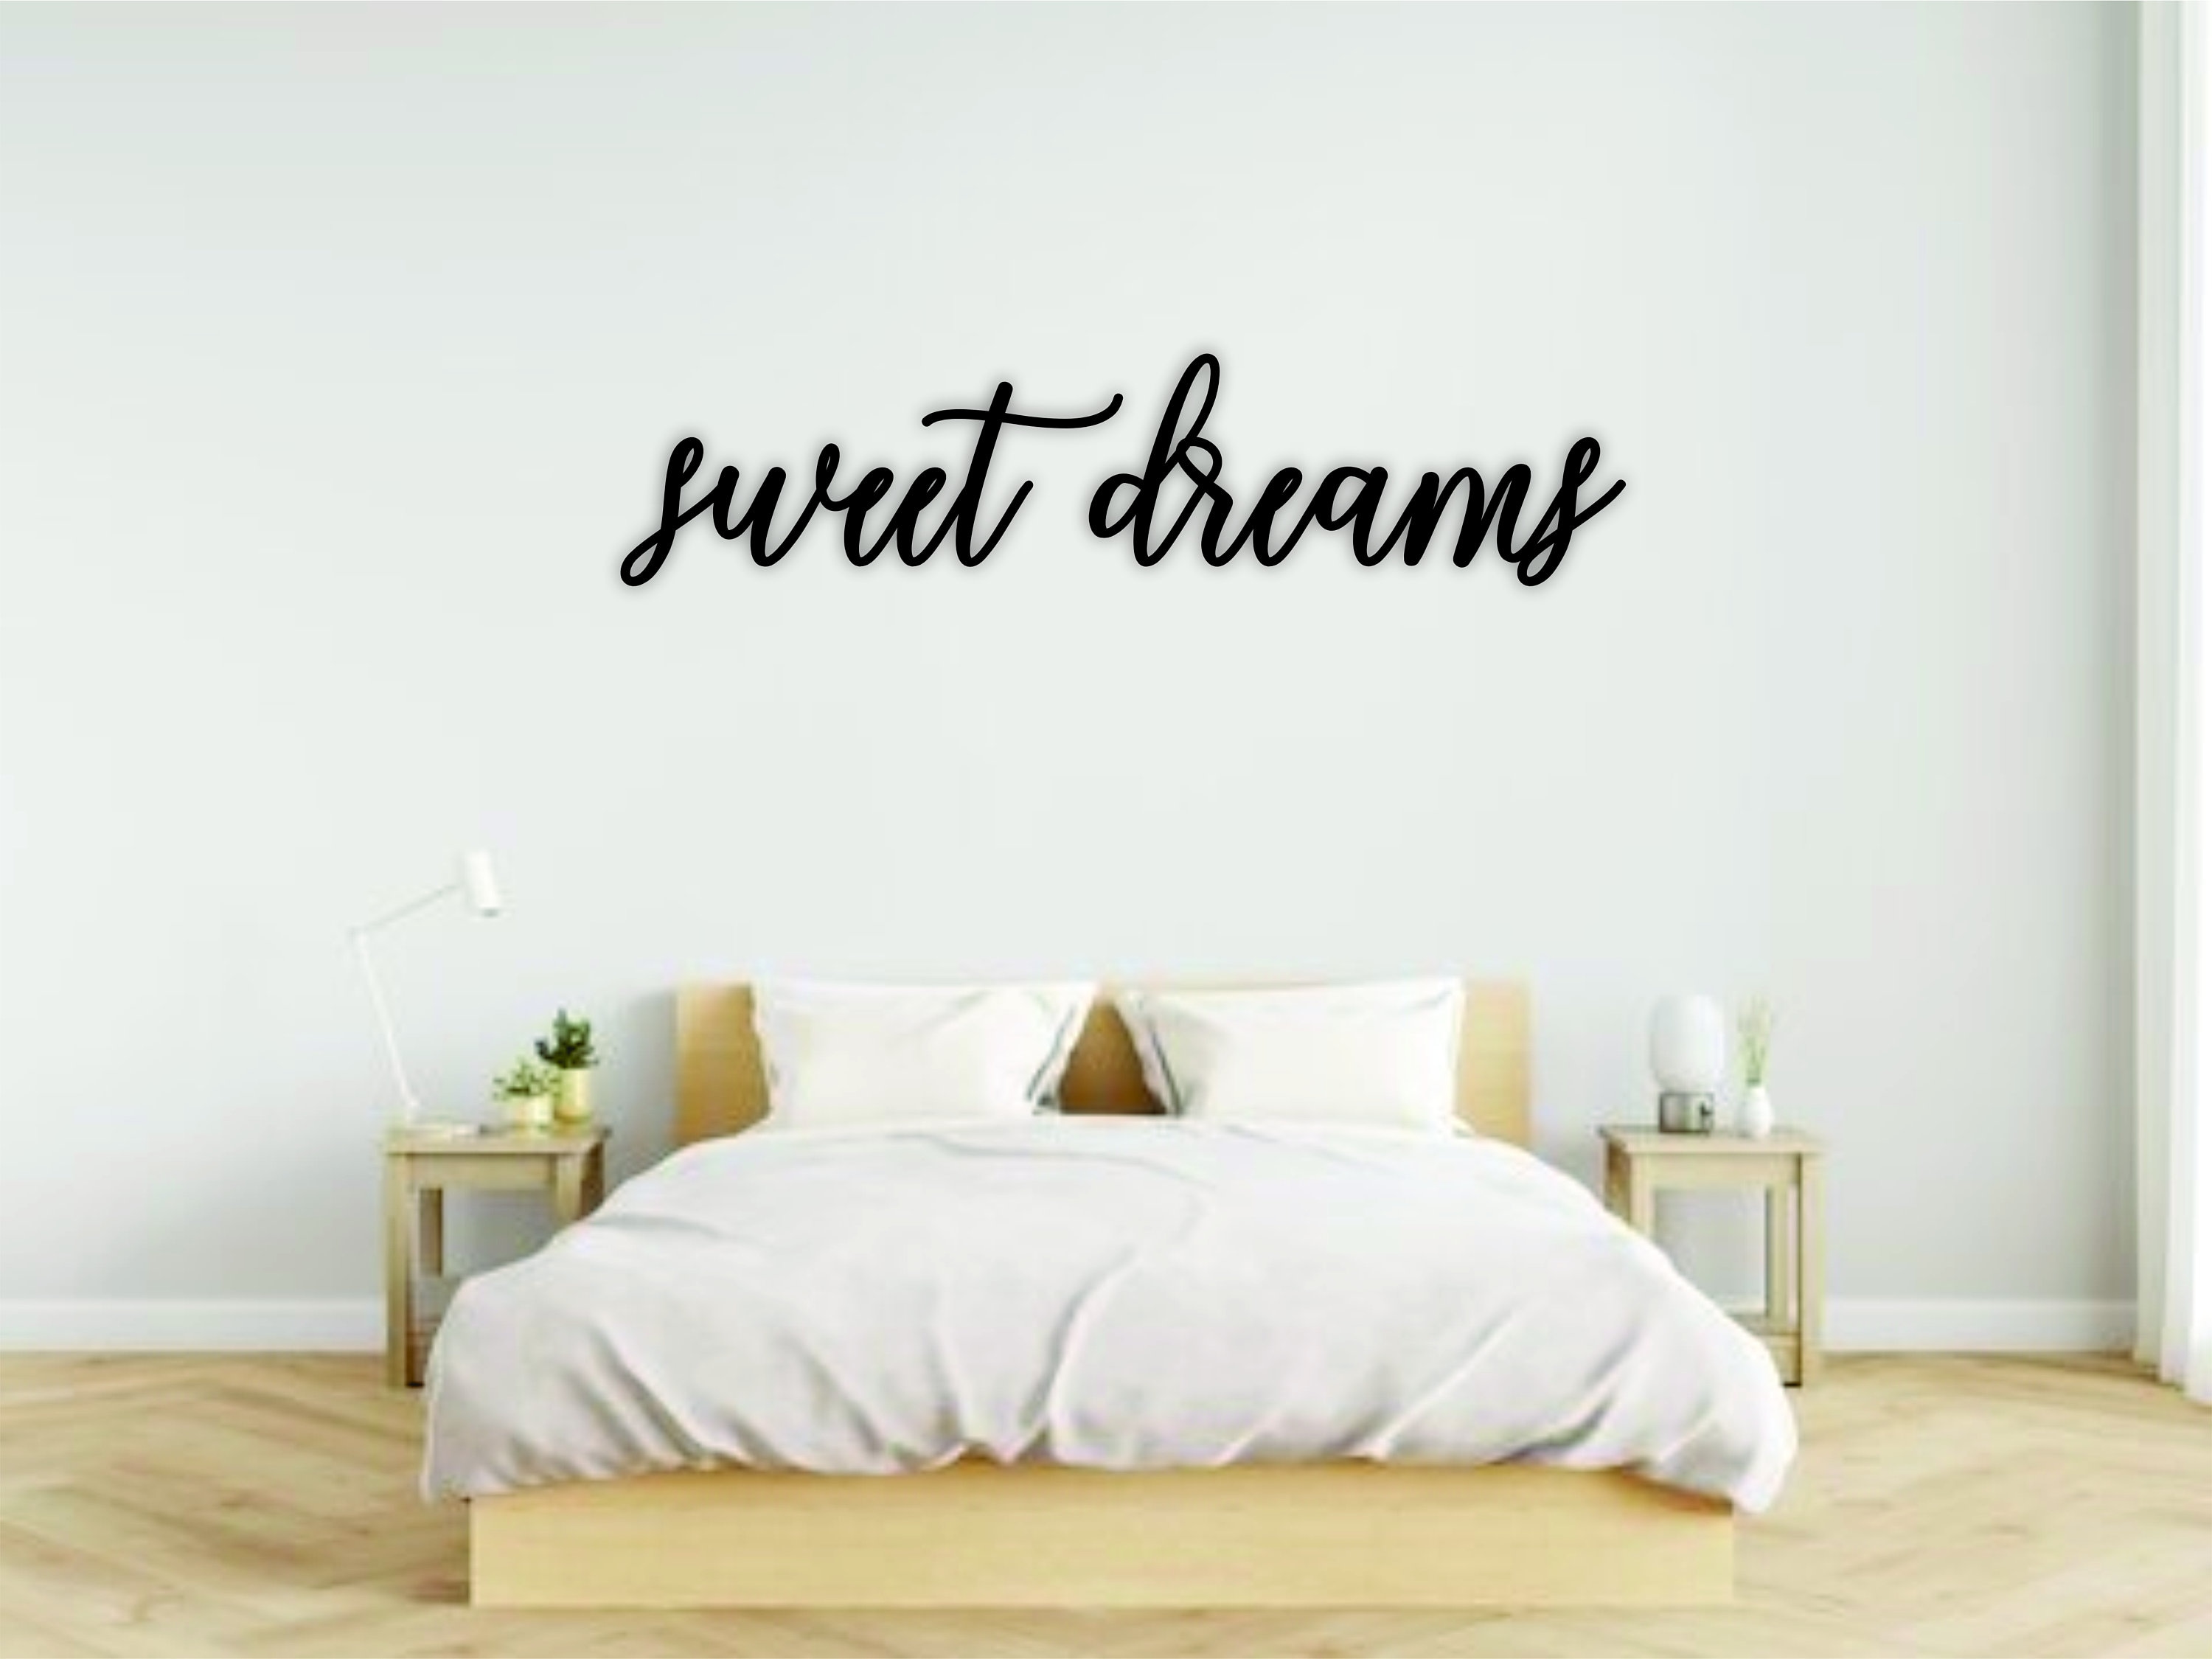 My Dreams Dream Wooden Letters On Stock Photo 545549434